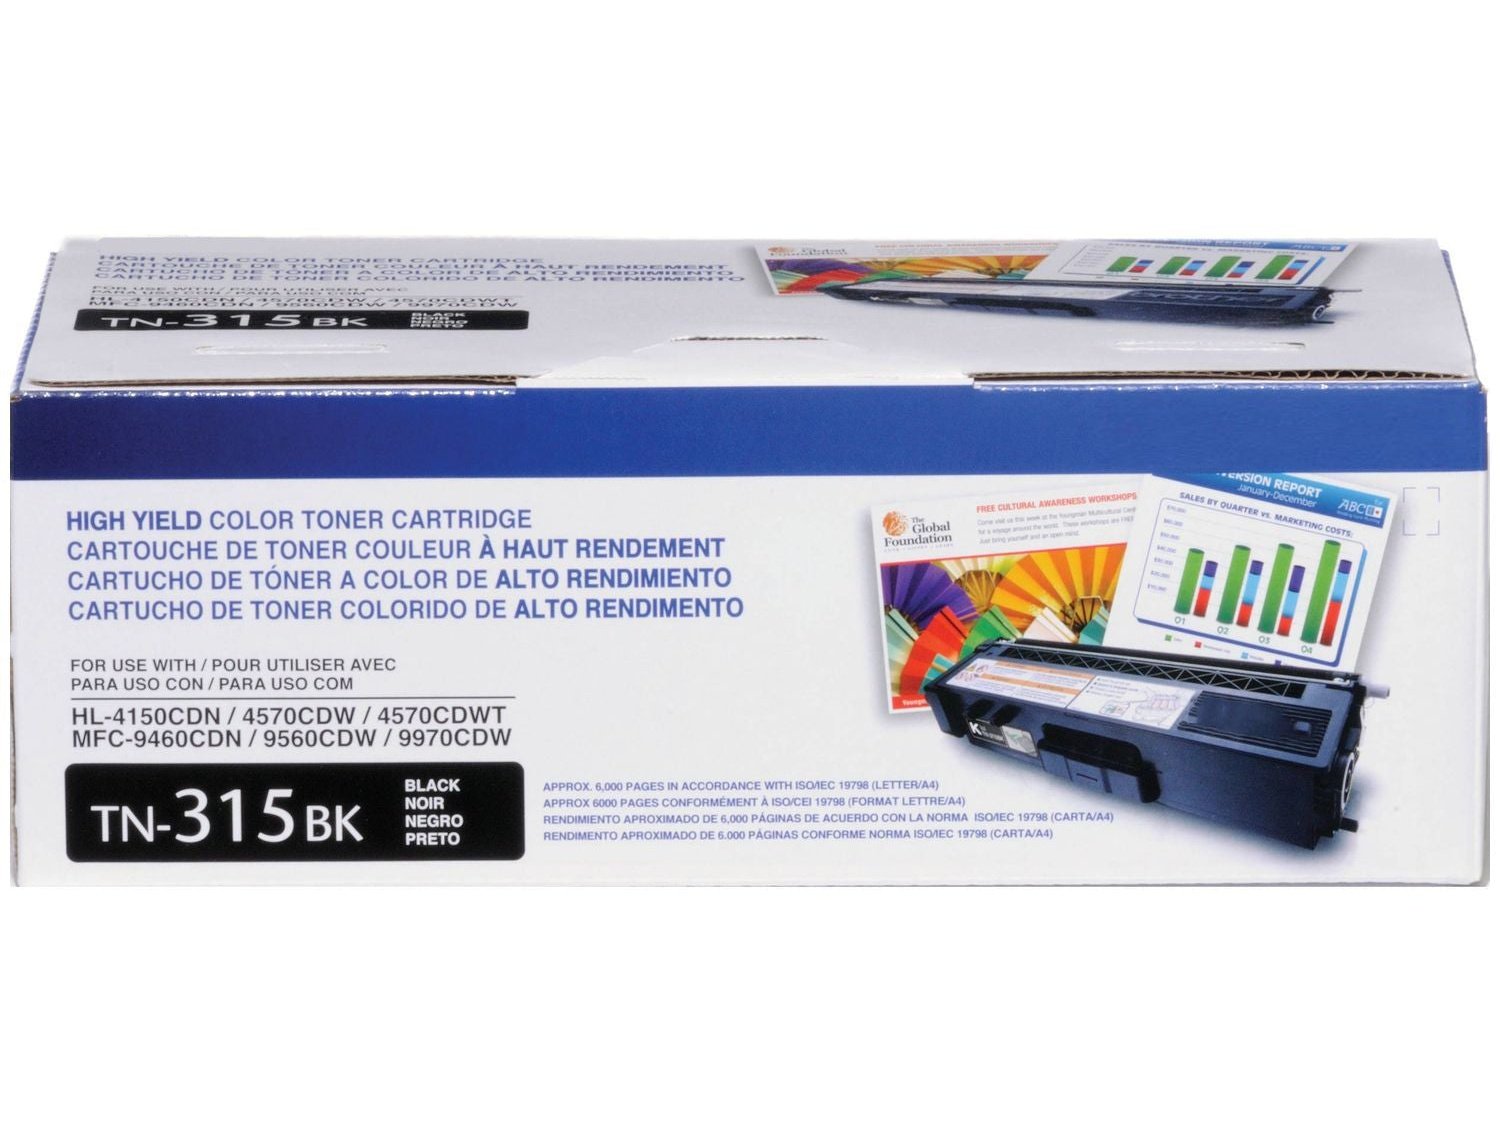 ICU Compatible/ OEM Get Brother ICU-TN-315-BKH Yields 3500 Pages TN-315 Black High Yield 6000 Pages Toner Cartridge (TN315BK) - Ink Cartridges USA